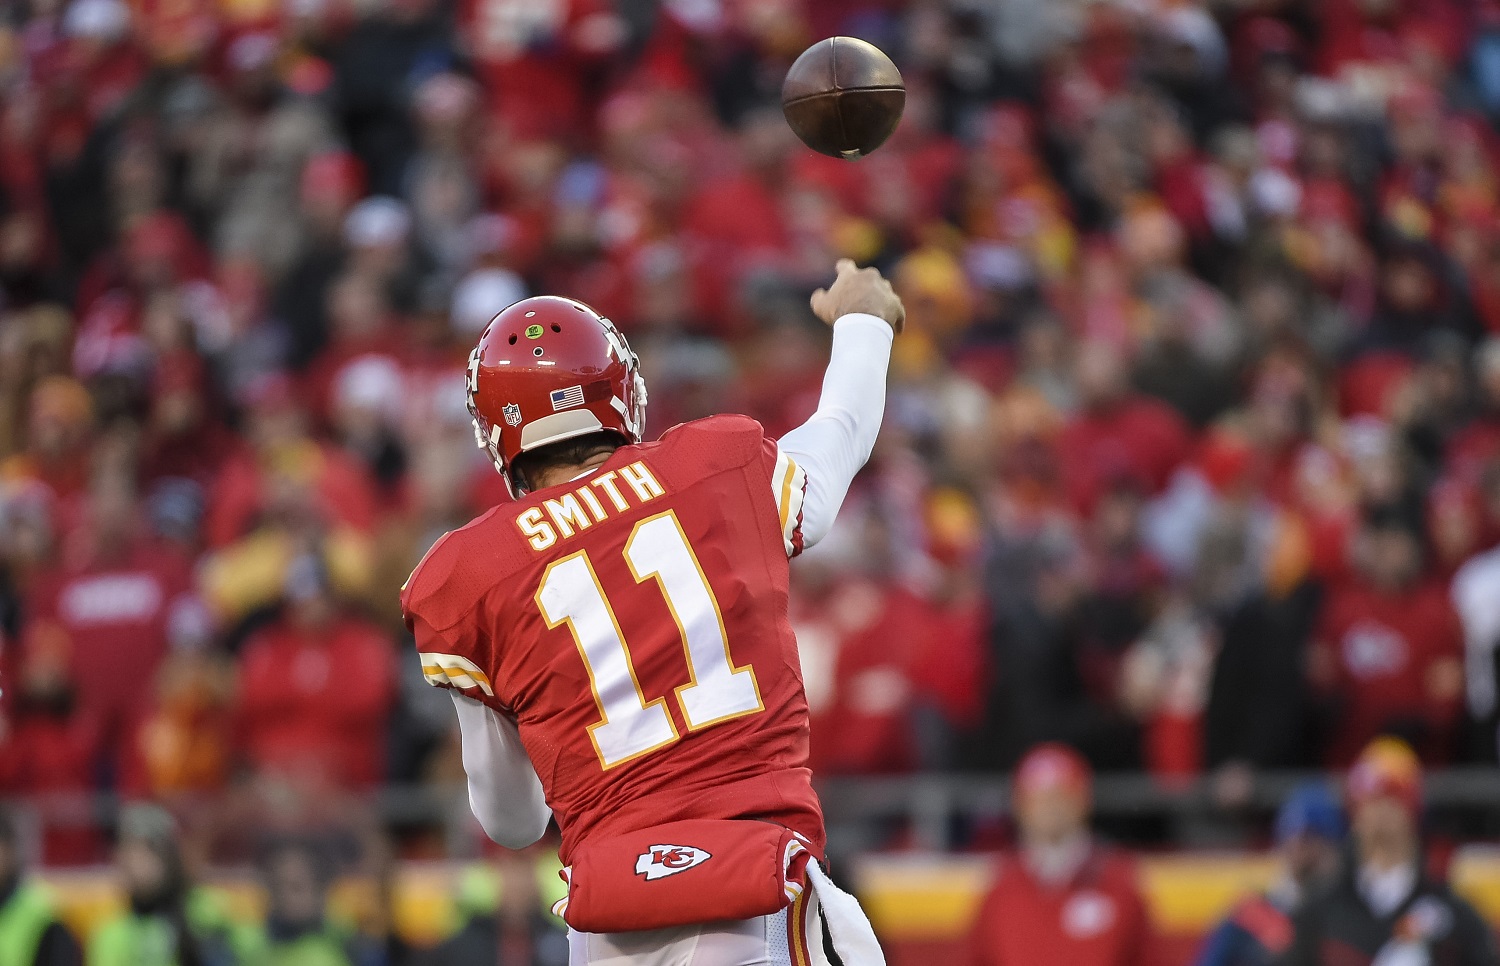 Kansas City Chiefs quarterback Alex Smith (11) throws against the Oakland Raiders during the first half of their NFL football game in Kansas City, Mo., Sunday, Jan, 3, 2016. (AP Photo/Reed Hoffmann)